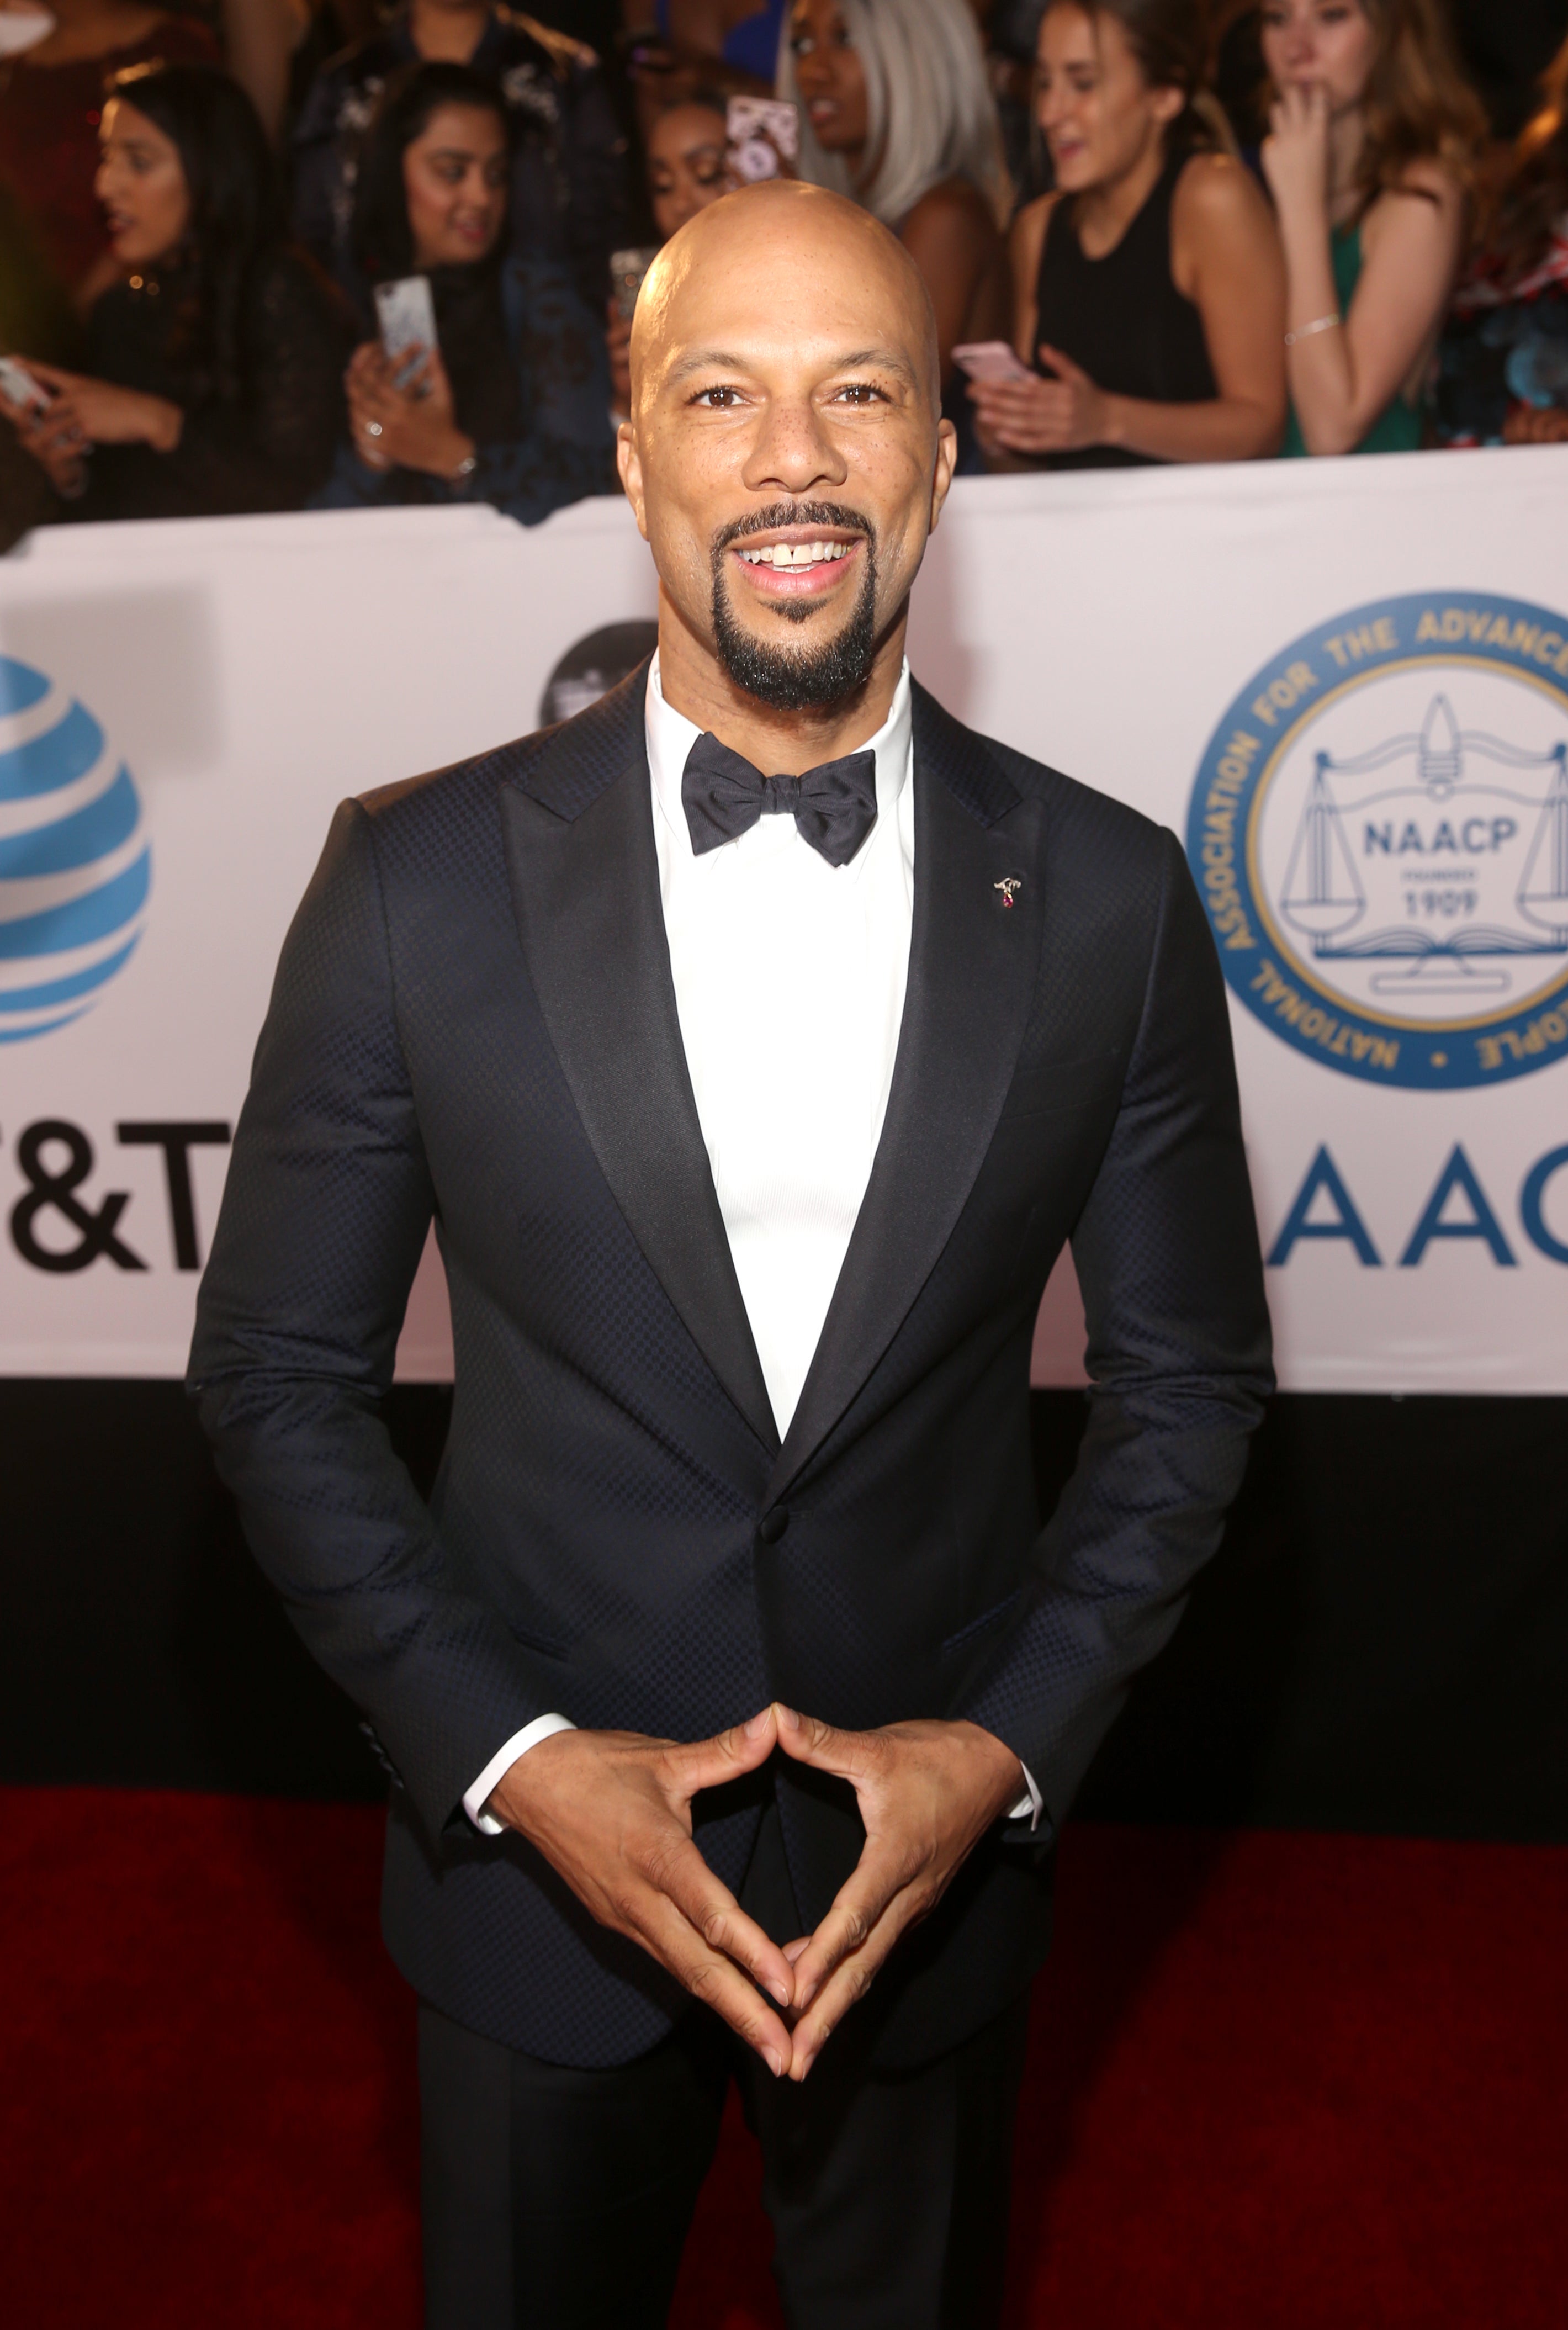 Oh, Hey Fellas! All The Fine Men At The 2018 NAACP Image Awards
